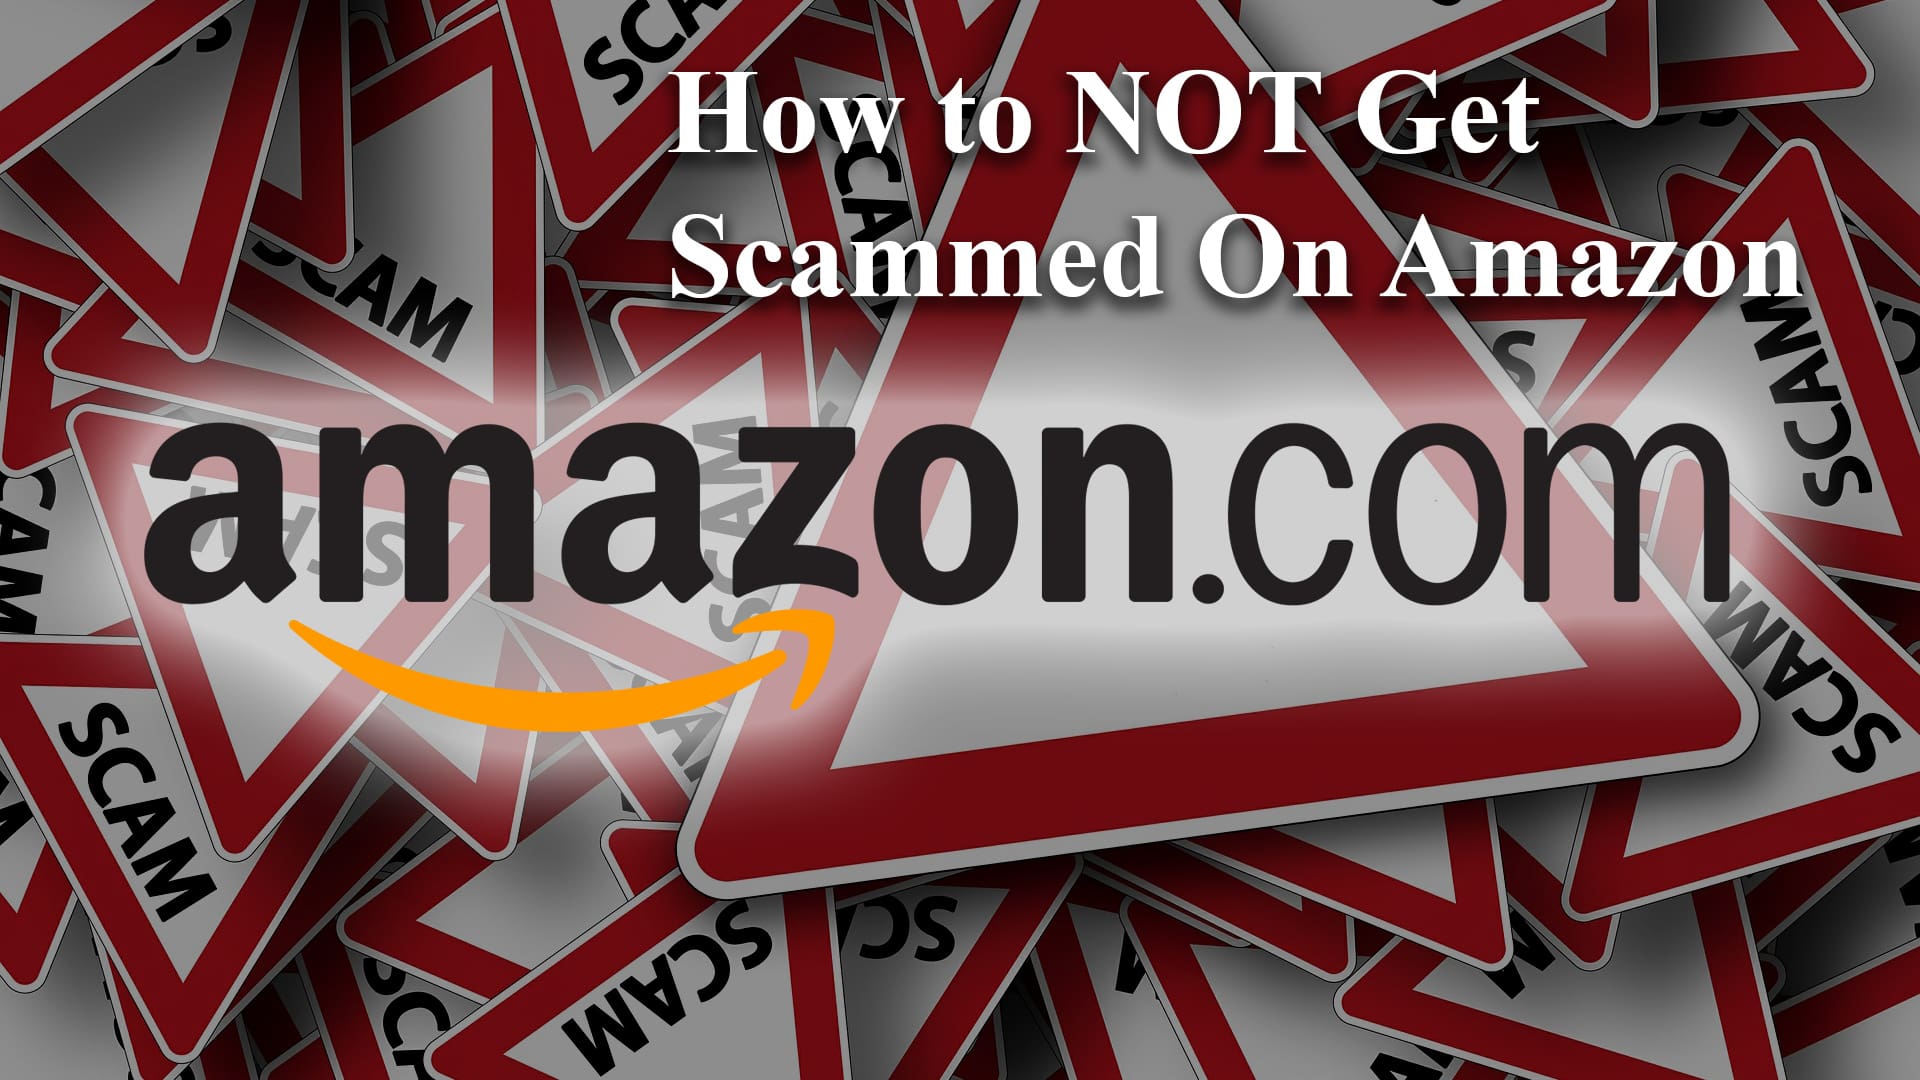 How to Not Get Scammed on Amazon